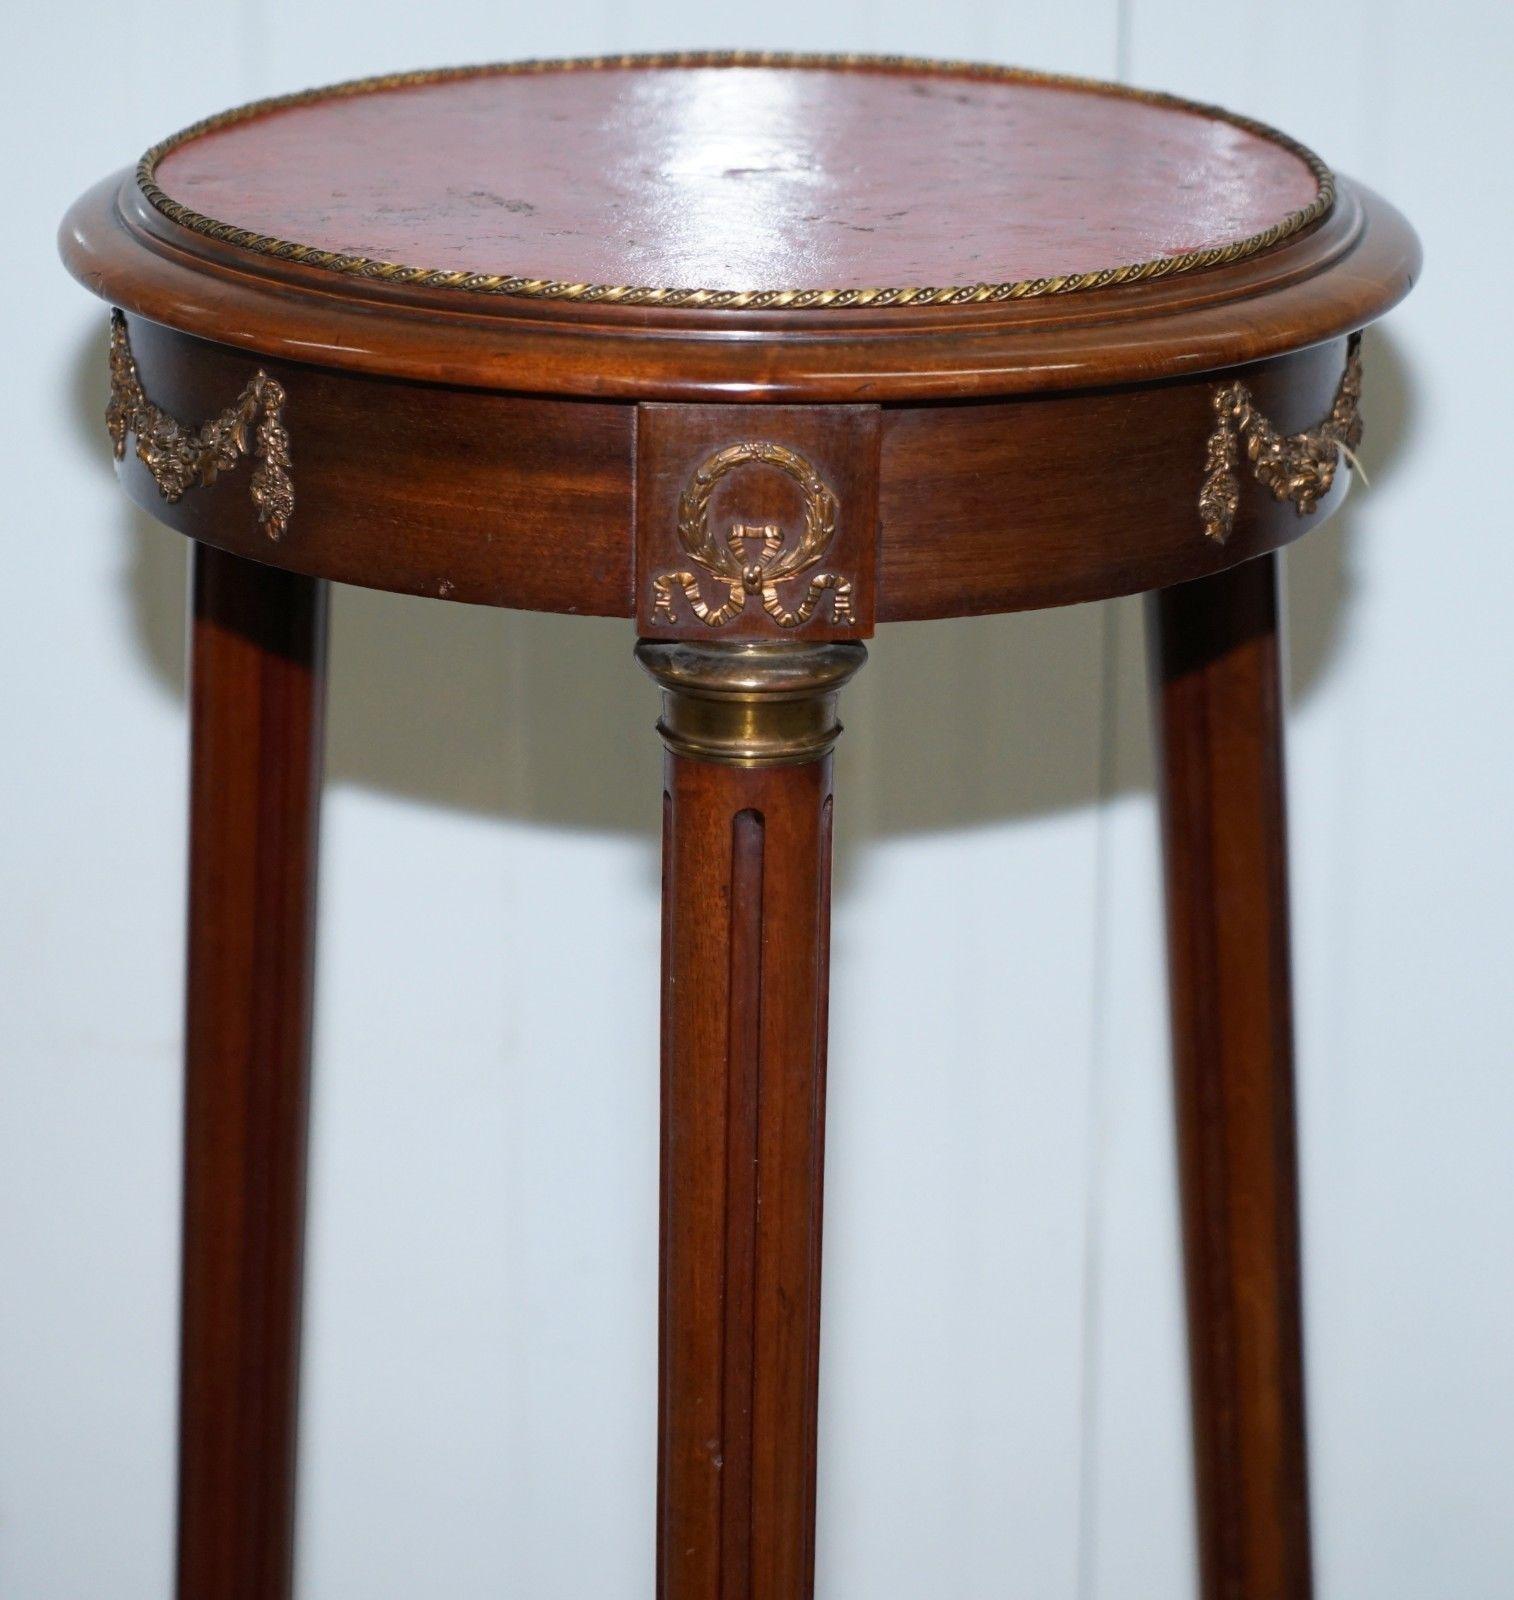 French Provincial 19th Century French Empire Hardwood Jardinière Bust Pot Stand Leather Top Brass